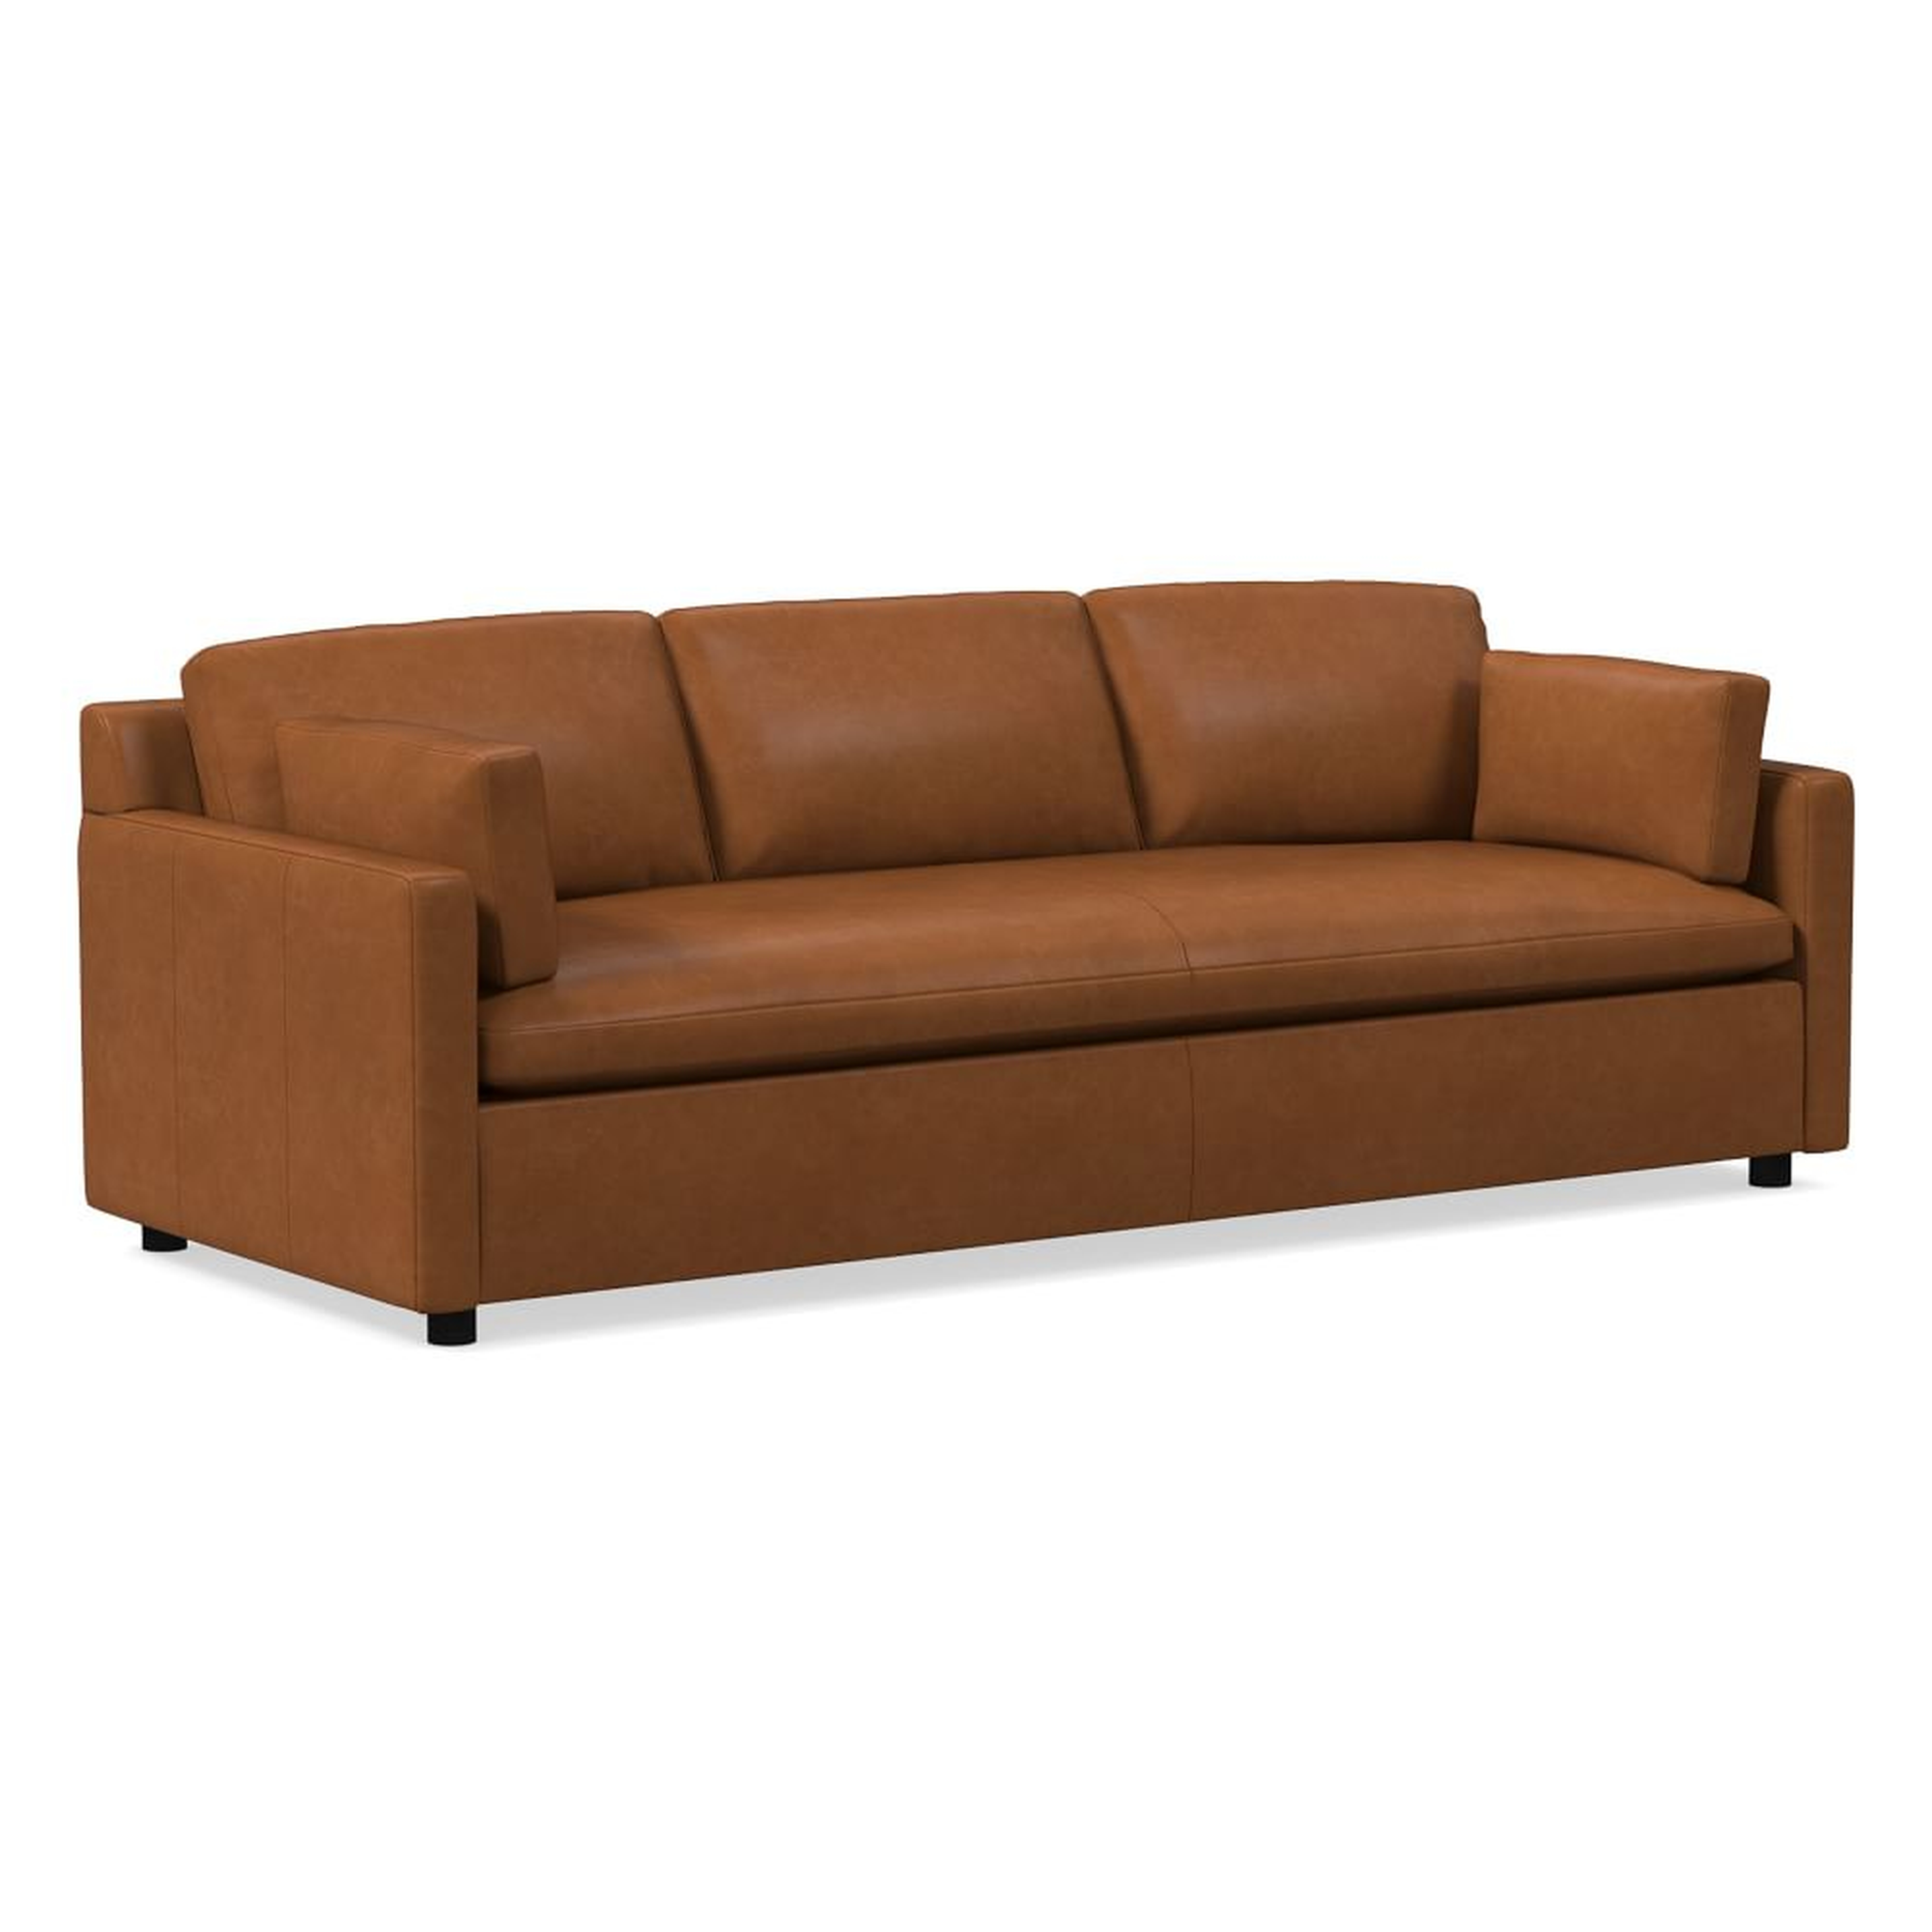 Marin 94" Sofa, Down, Ludlow Leather, Mace, Concealed Support - West Elm